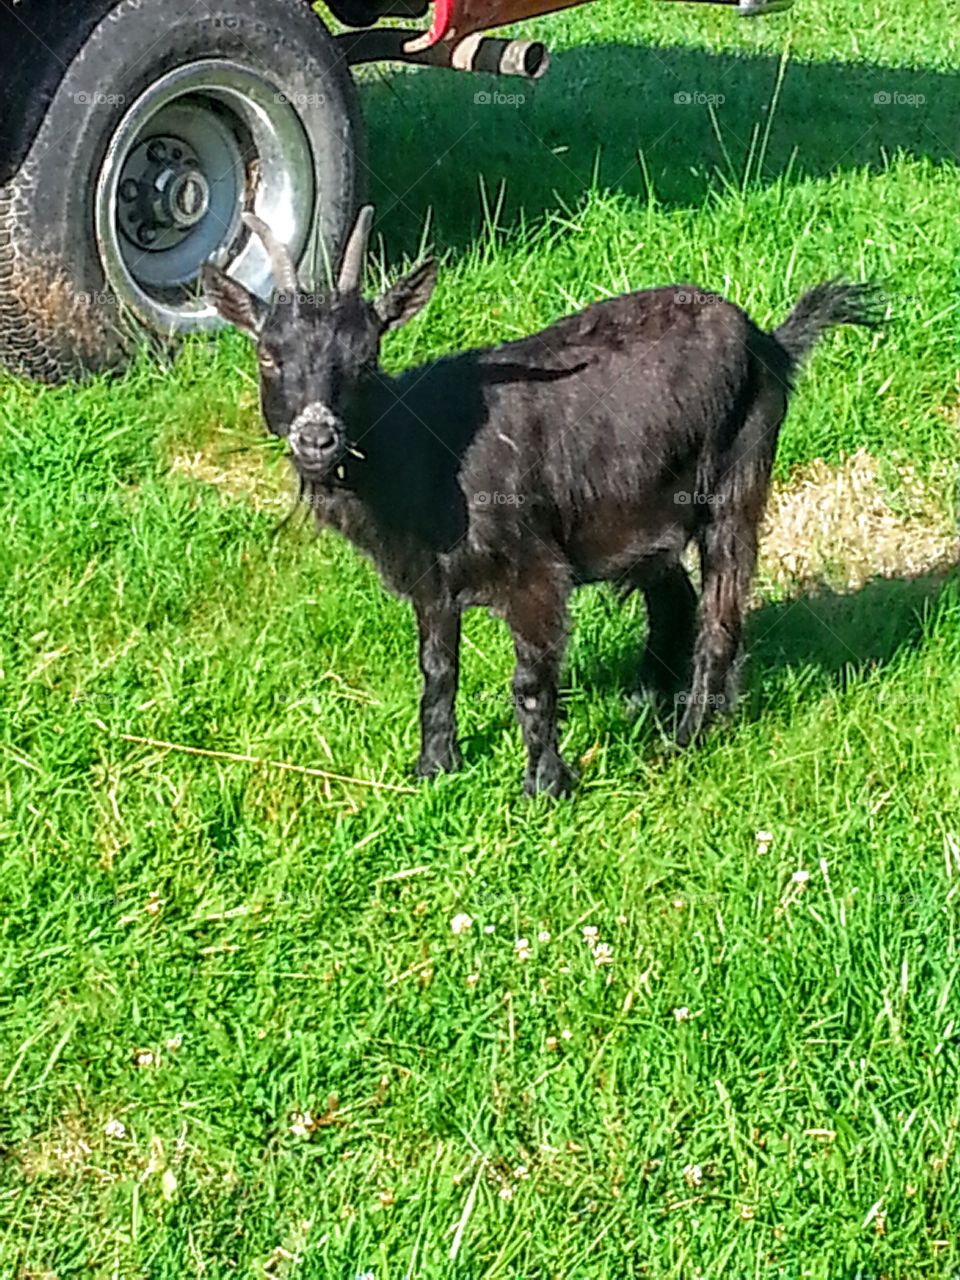 Billy Goat. Mini billy goat that was in our yard.